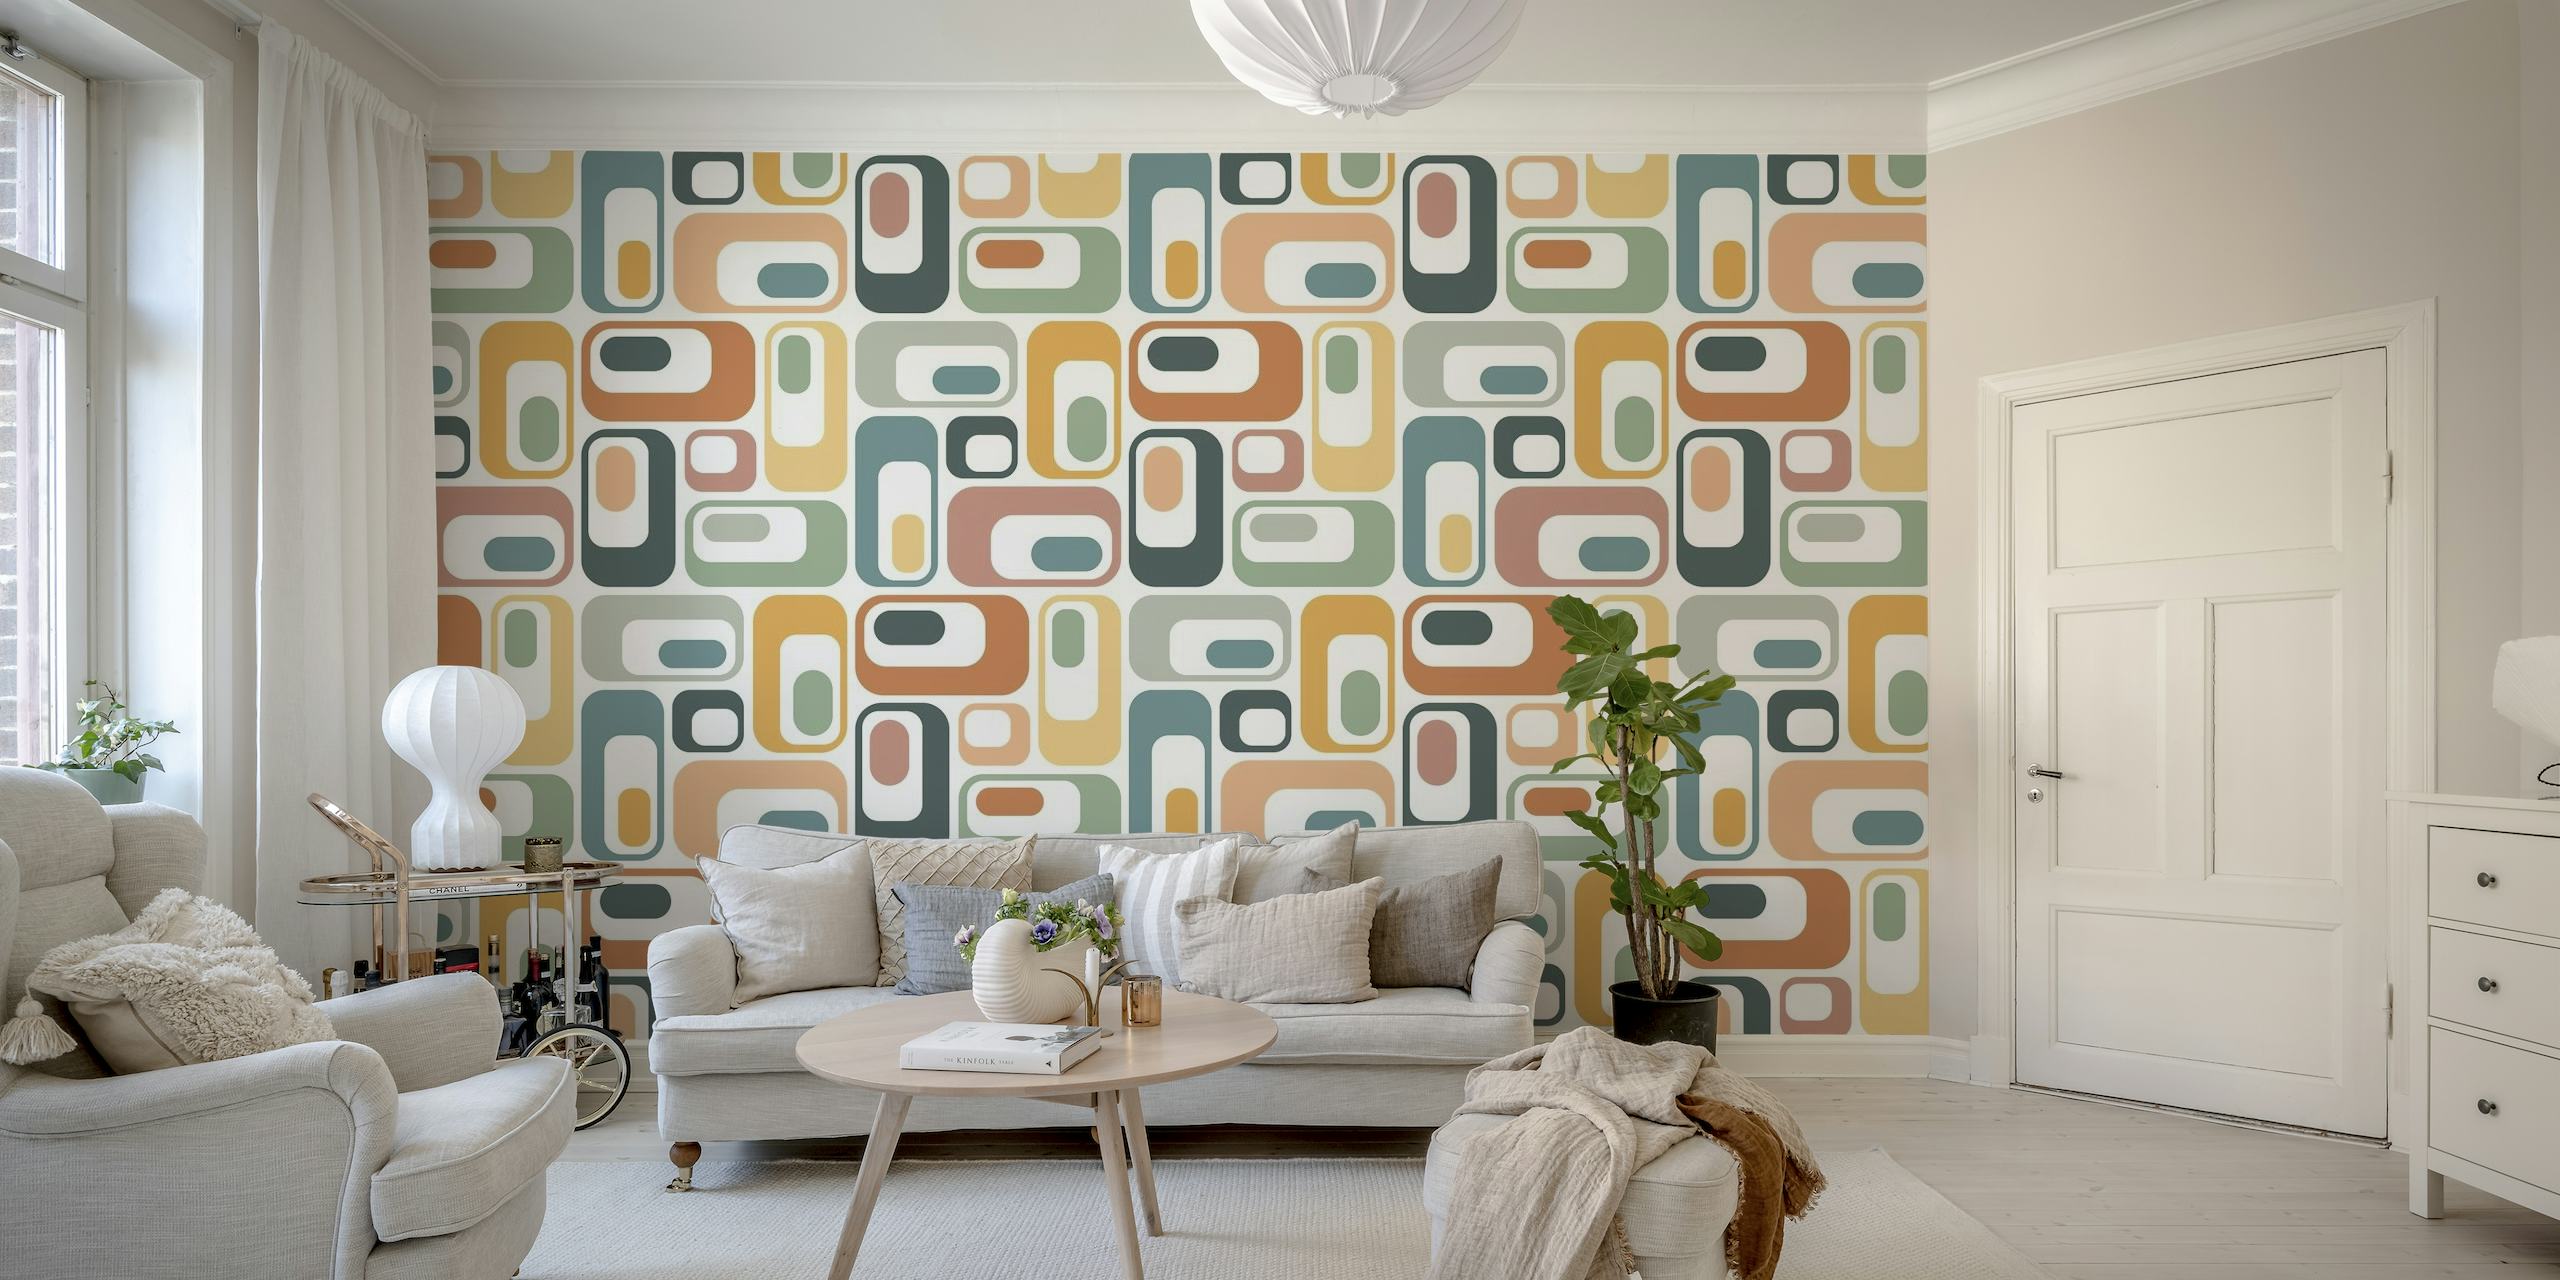 Retro ovals in pastel colors wall mural design